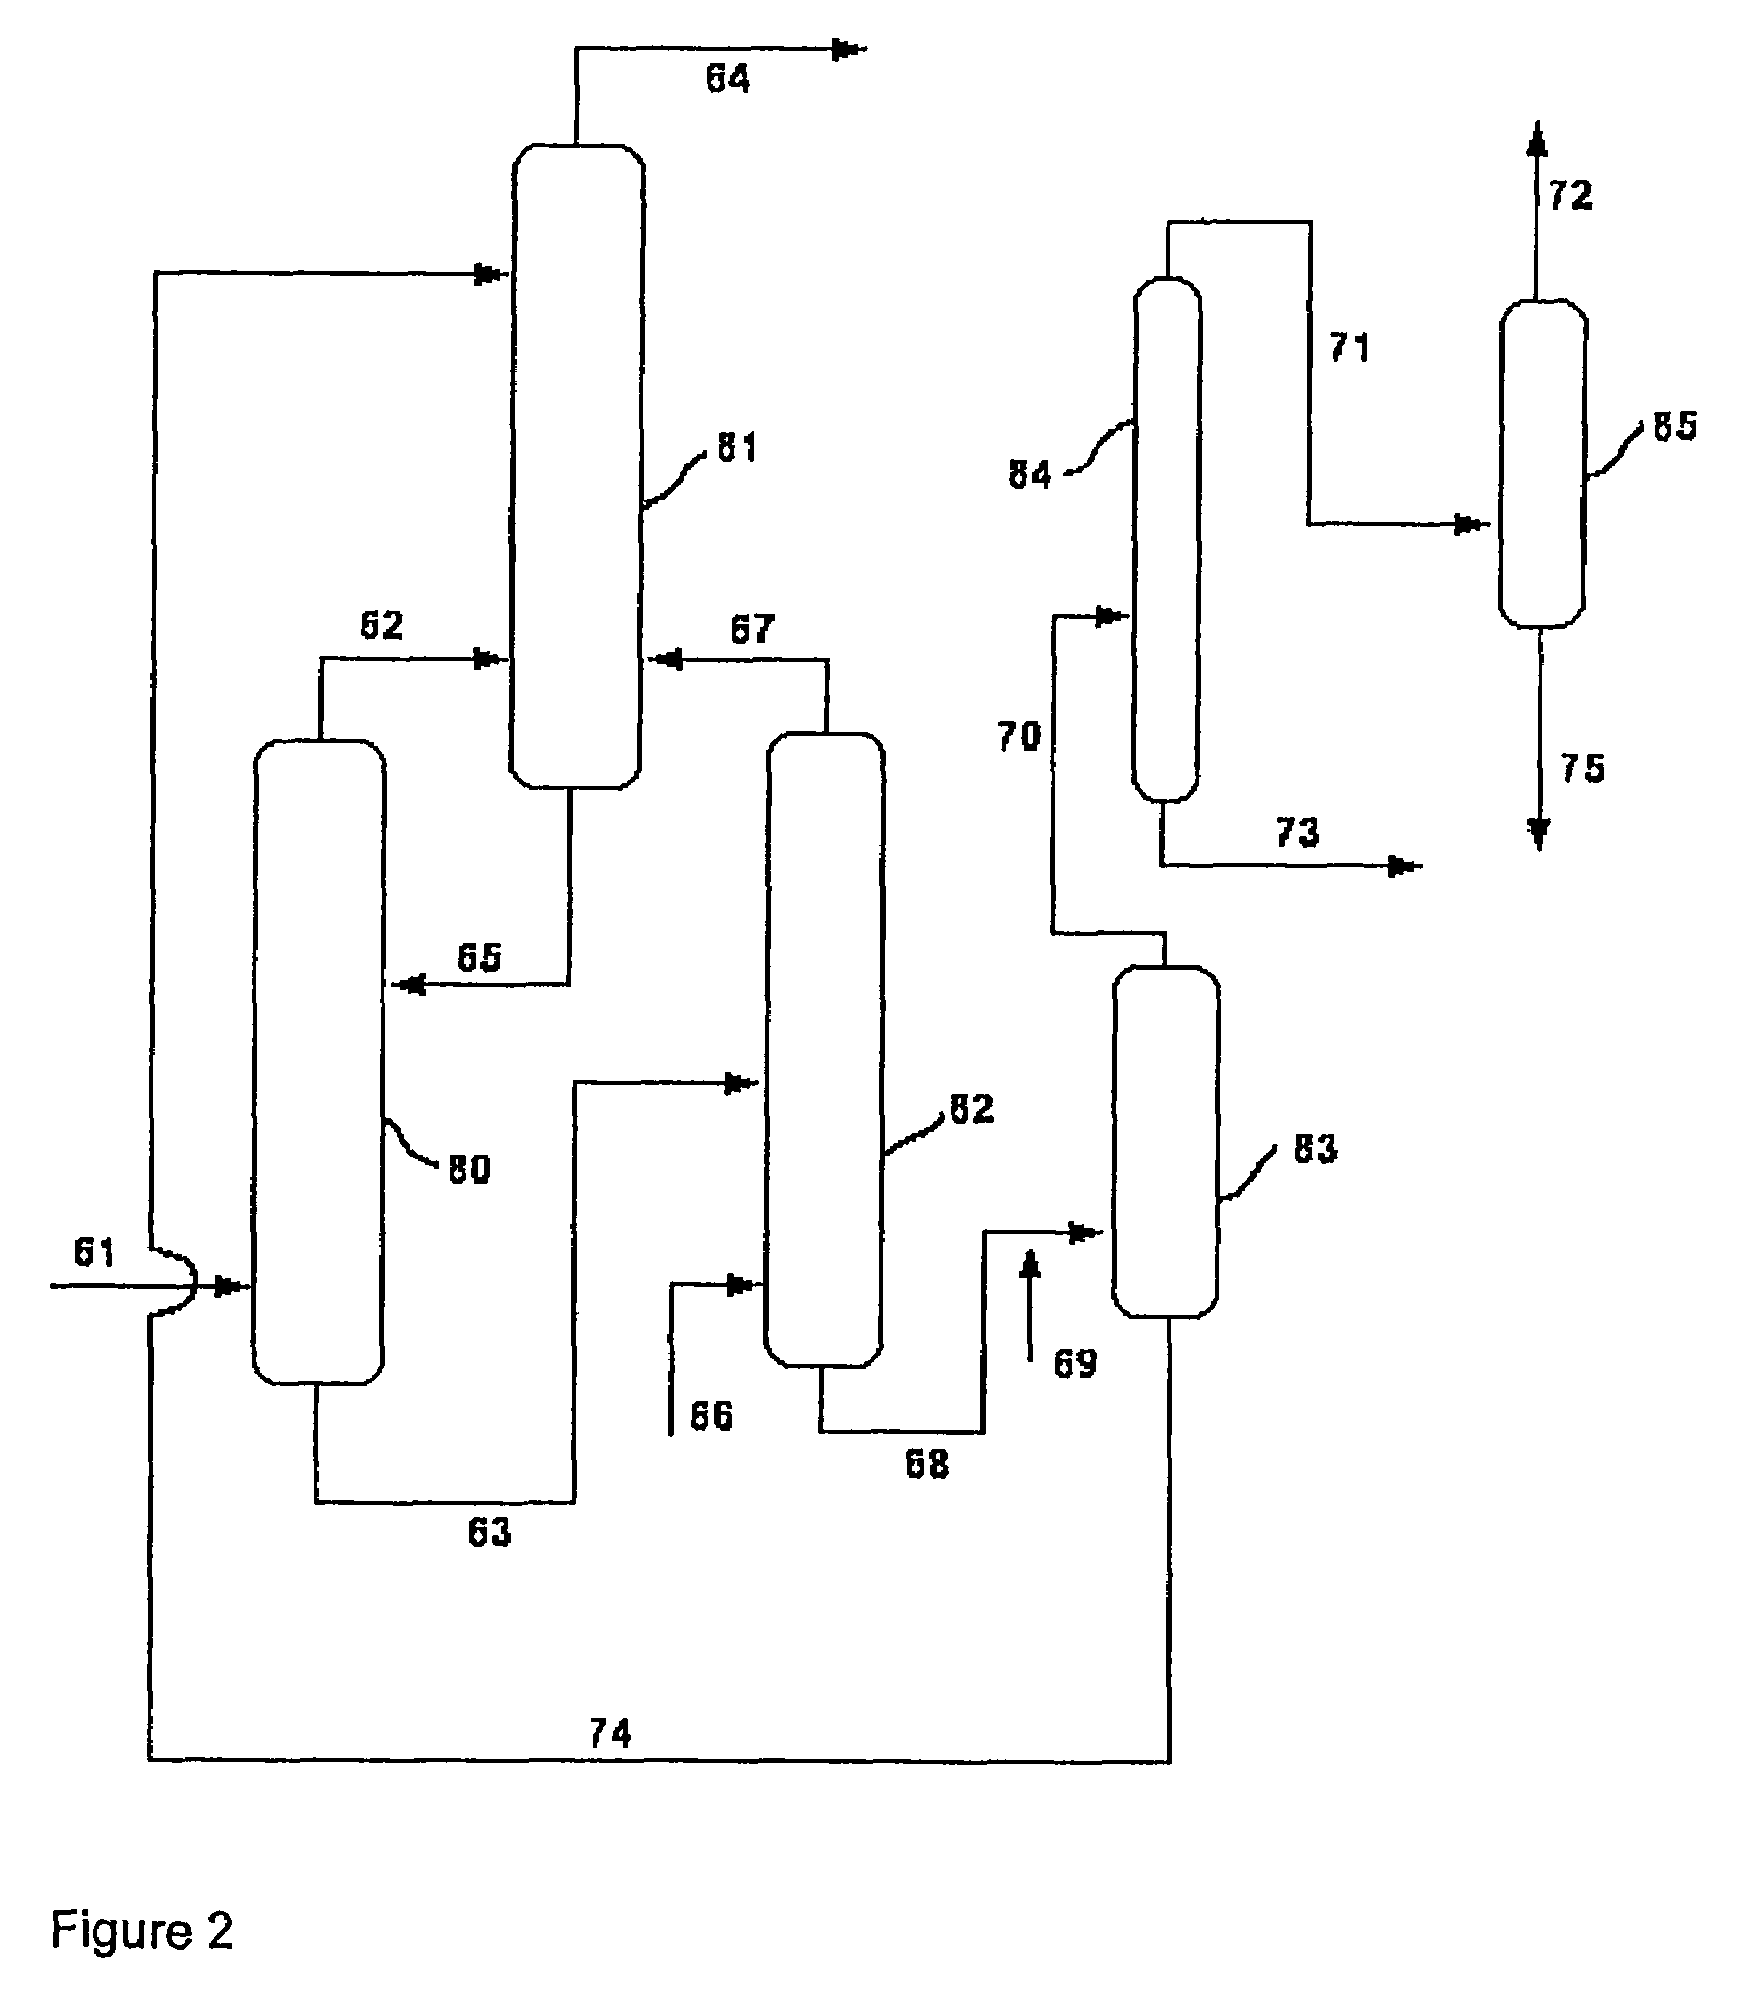 Process for recovery and recycle of ammonia from a vapor stream